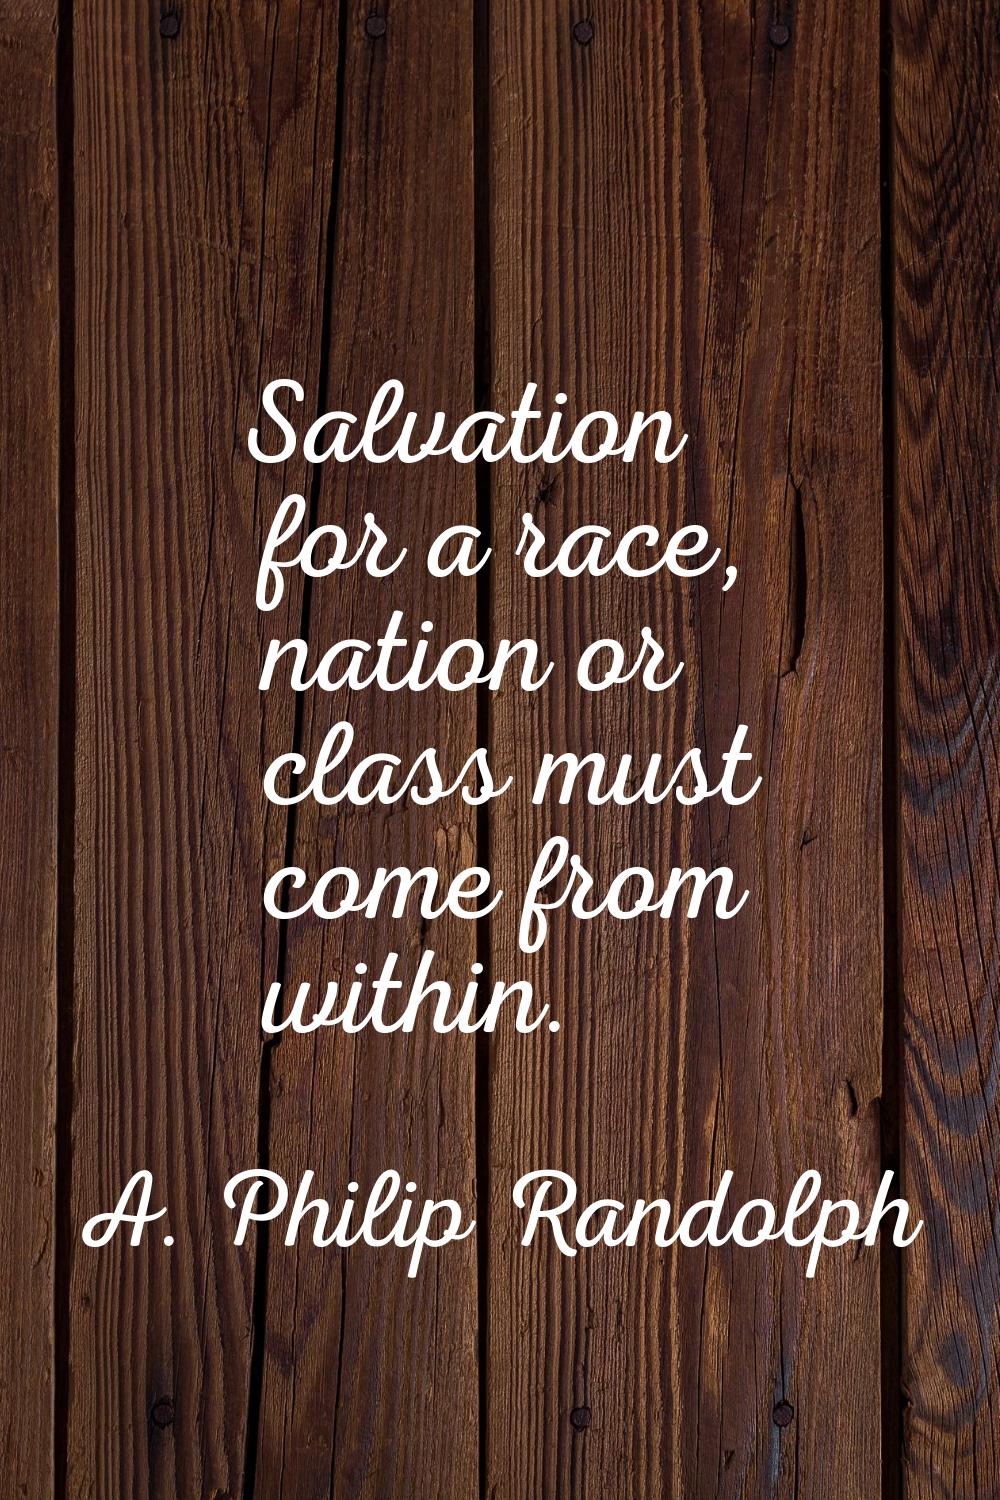 Salvation for a race, nation or class must come from within.